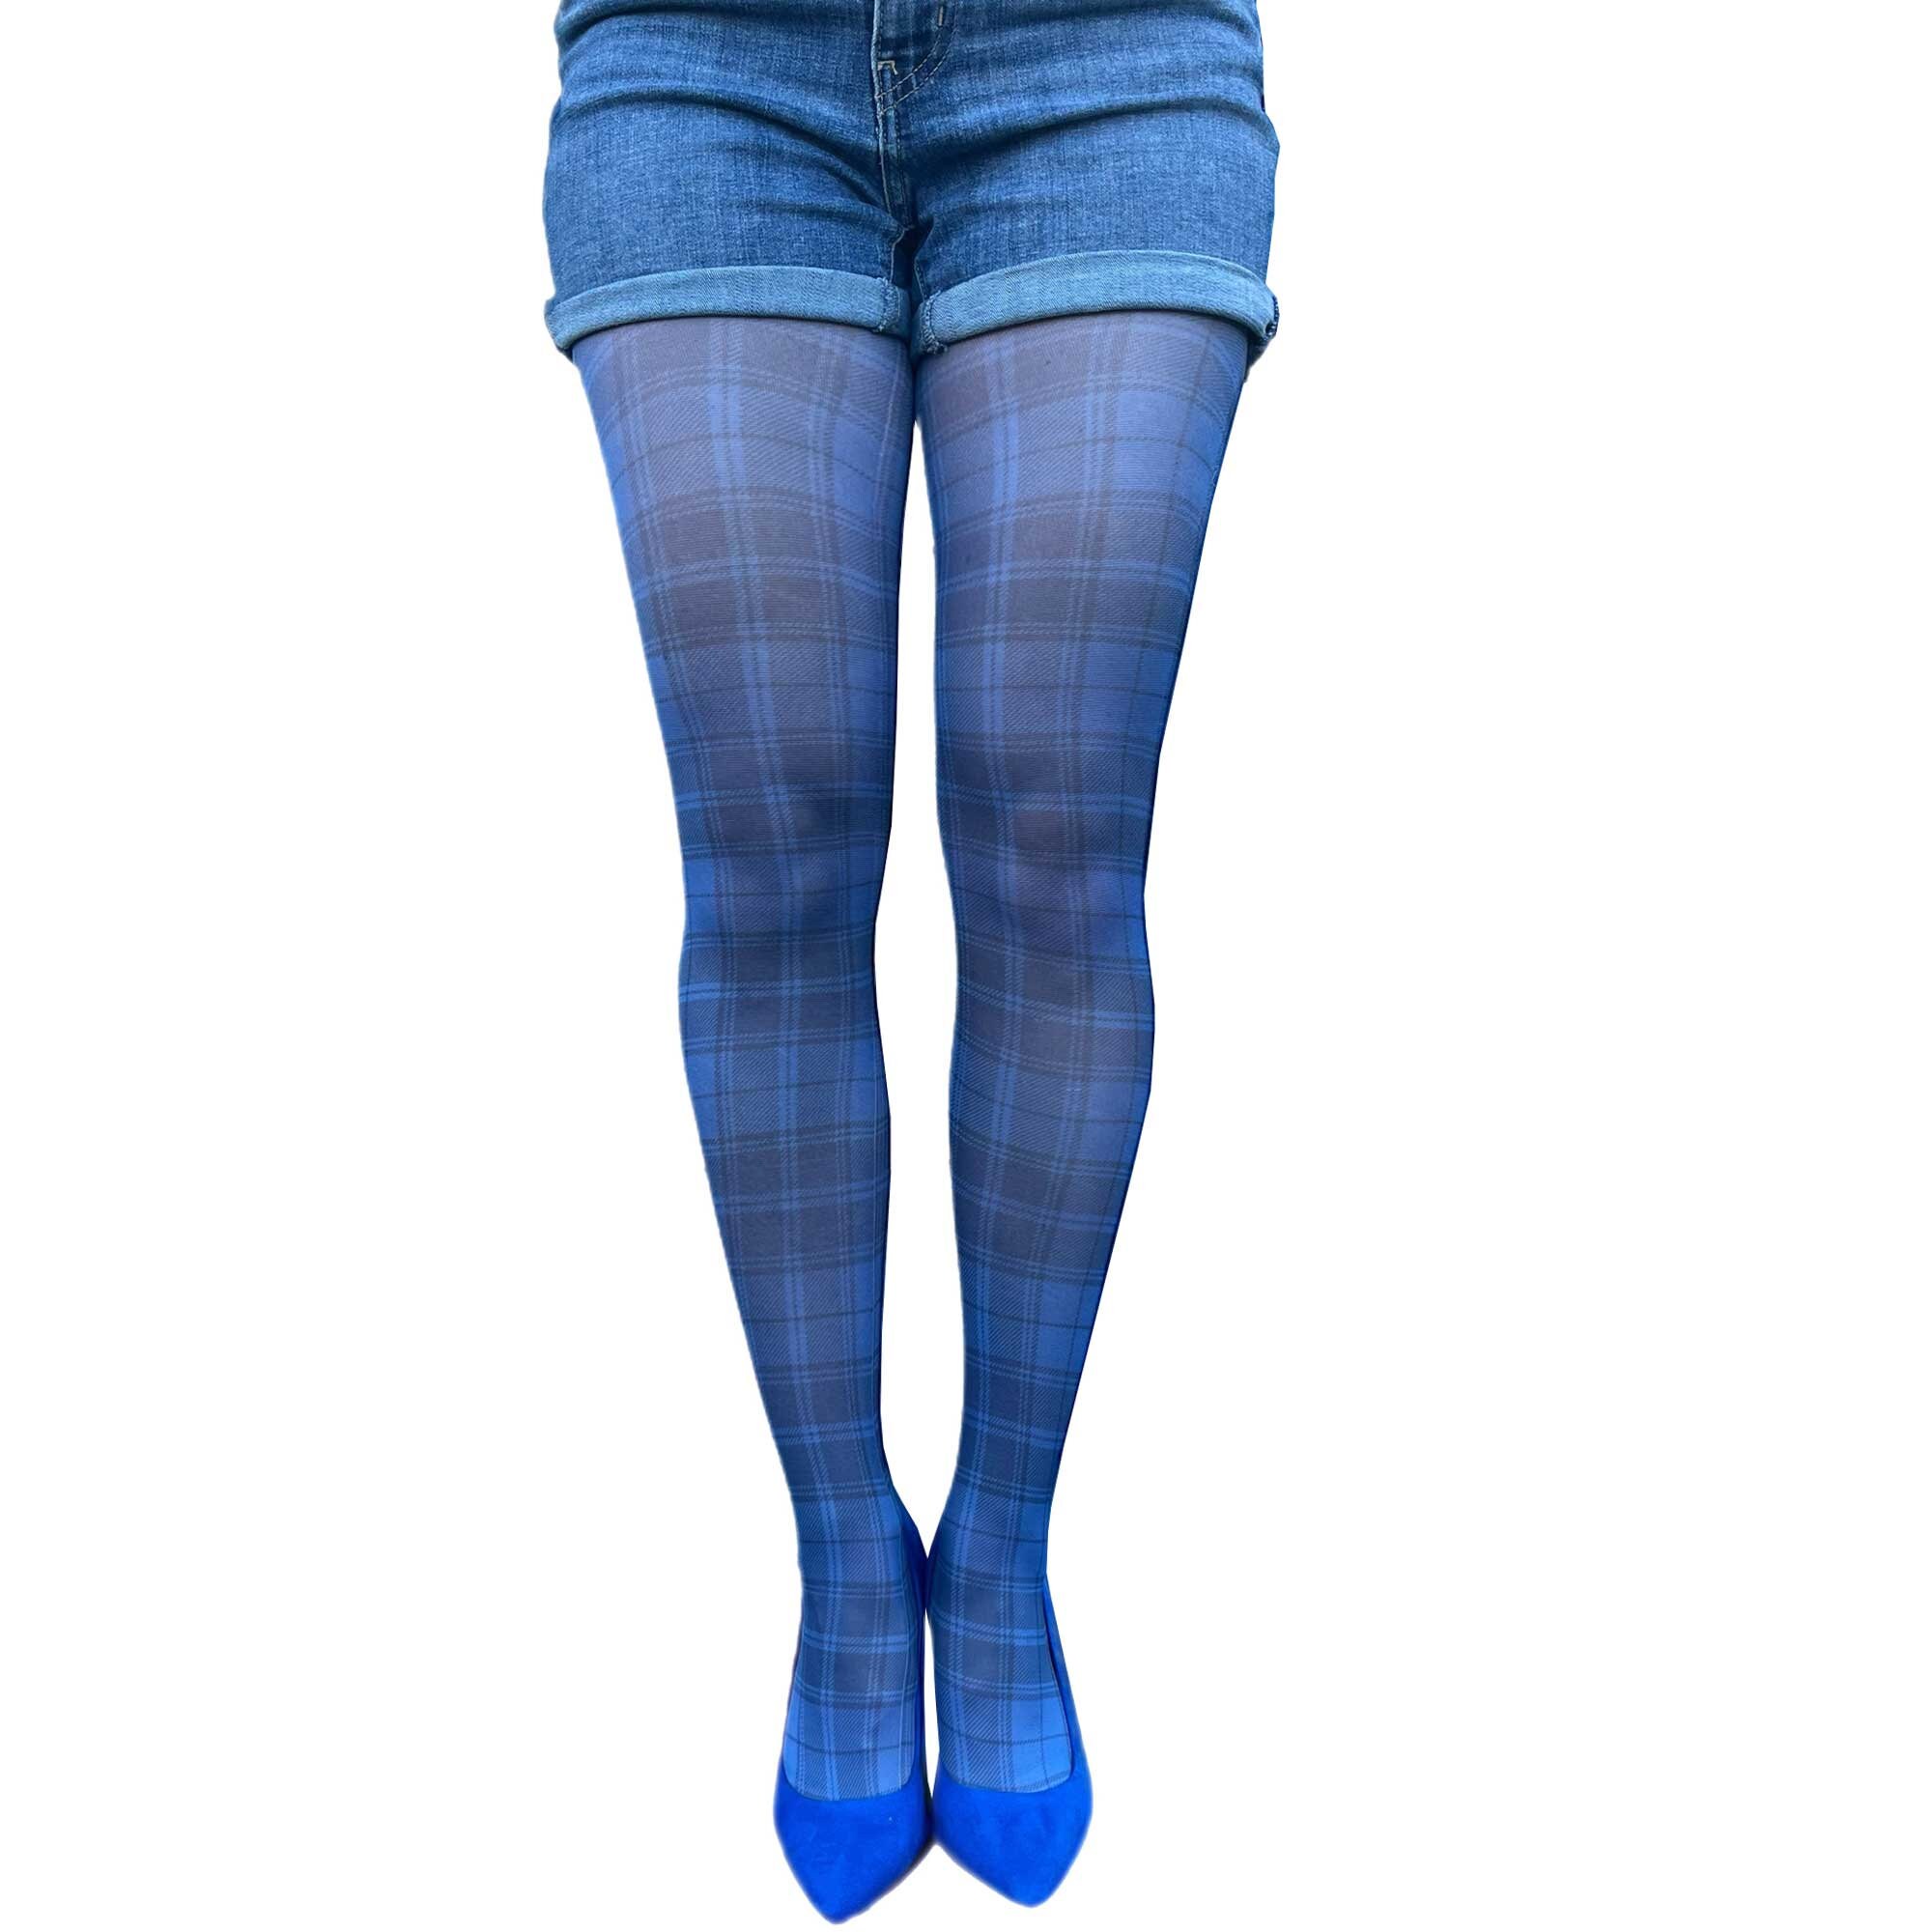 Blue Plaid Patterned Tights for Women 